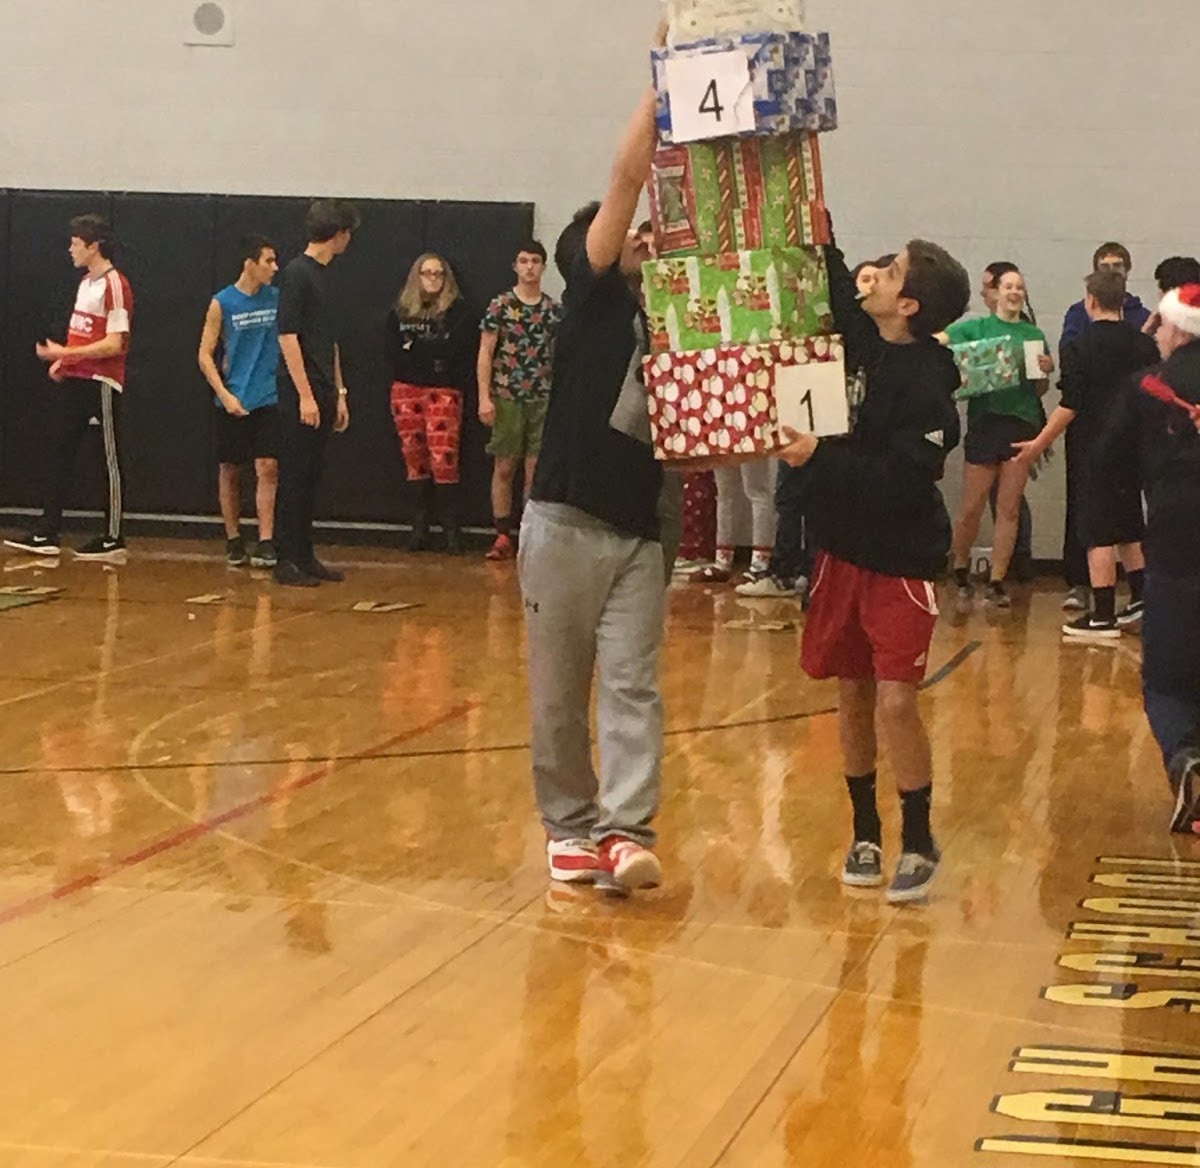 students carrying gifts